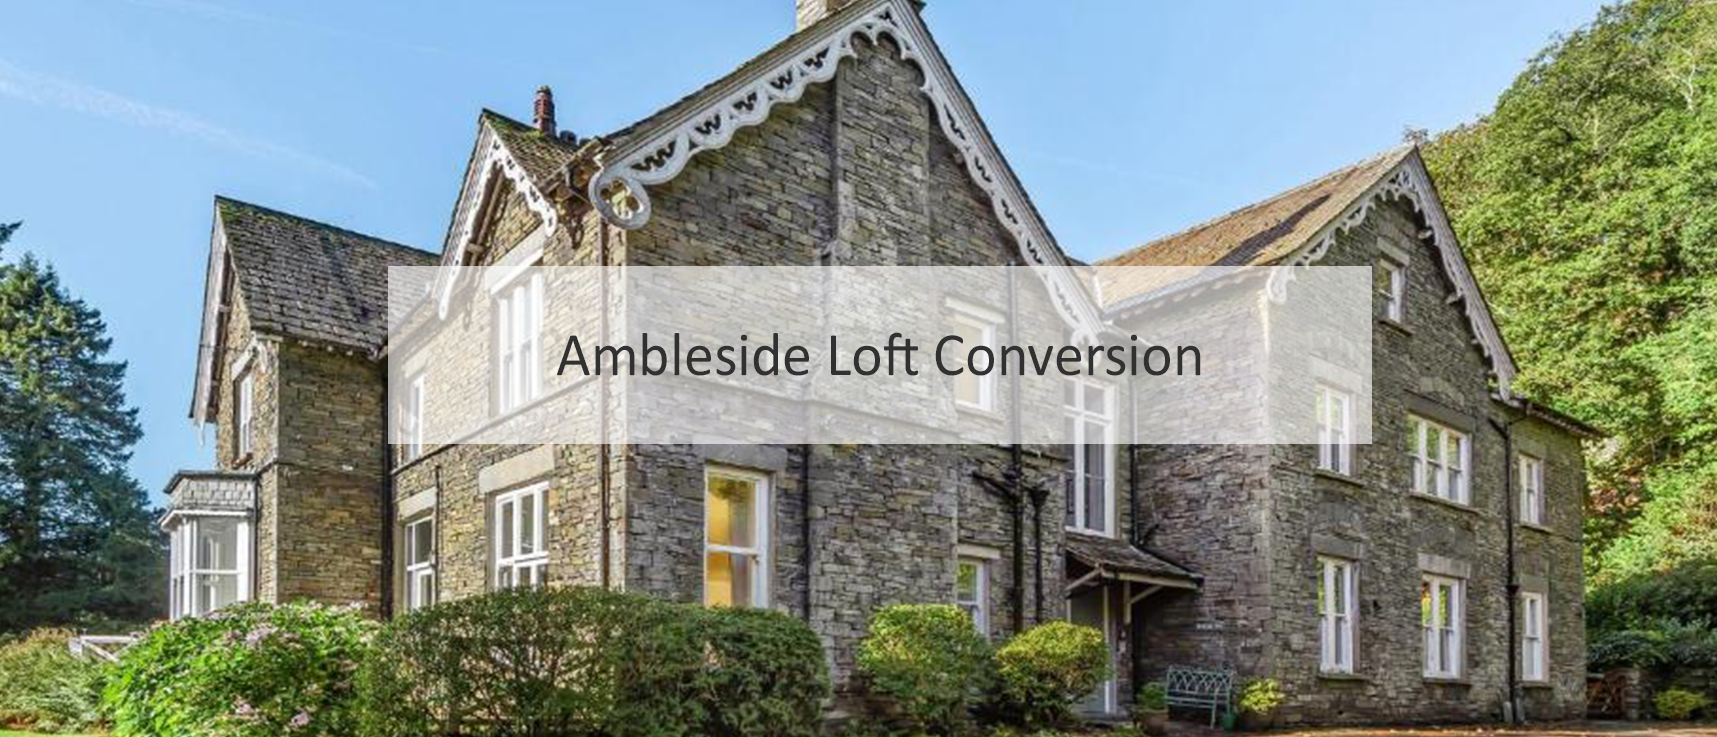 Loft conversion in the picturesque Ambleside, nestled in the heart of the Lake District.